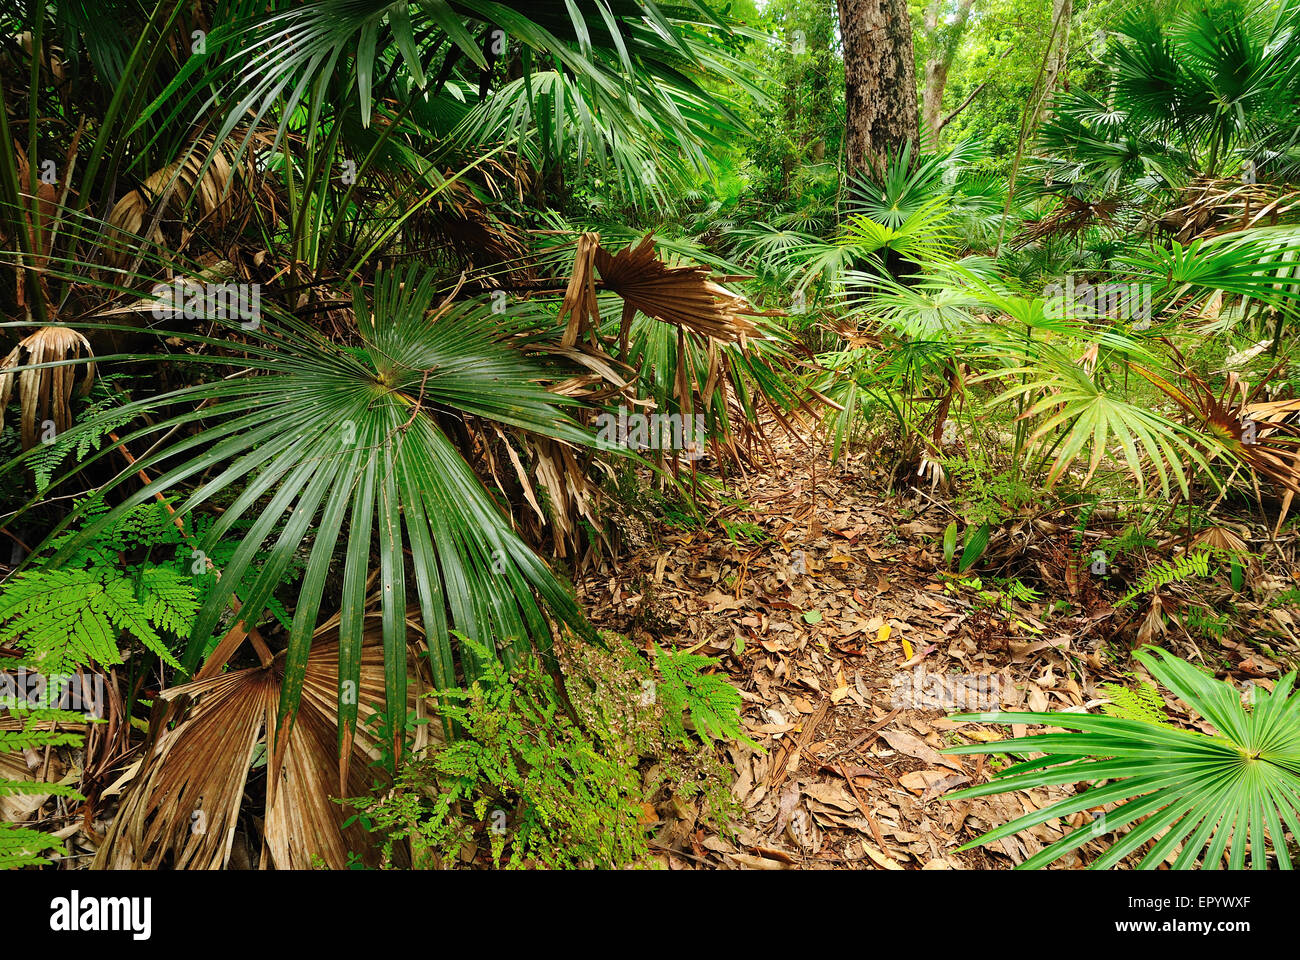 Australian bush forest with green trees and plants Stock Photo